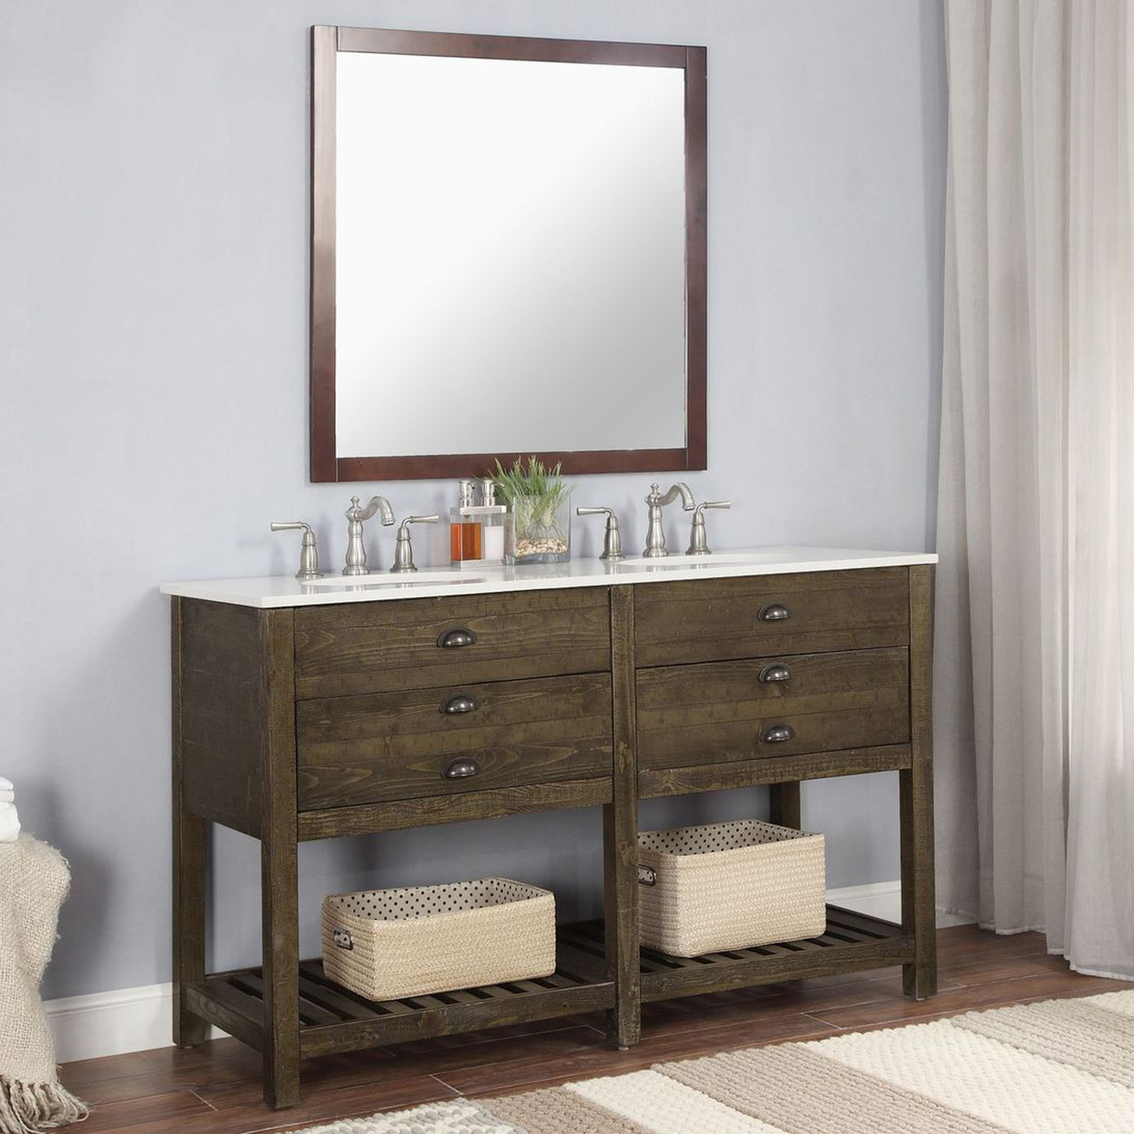 Coast to Coast Accents Two Drawer Double Vanity Sink - Image 6 of 6